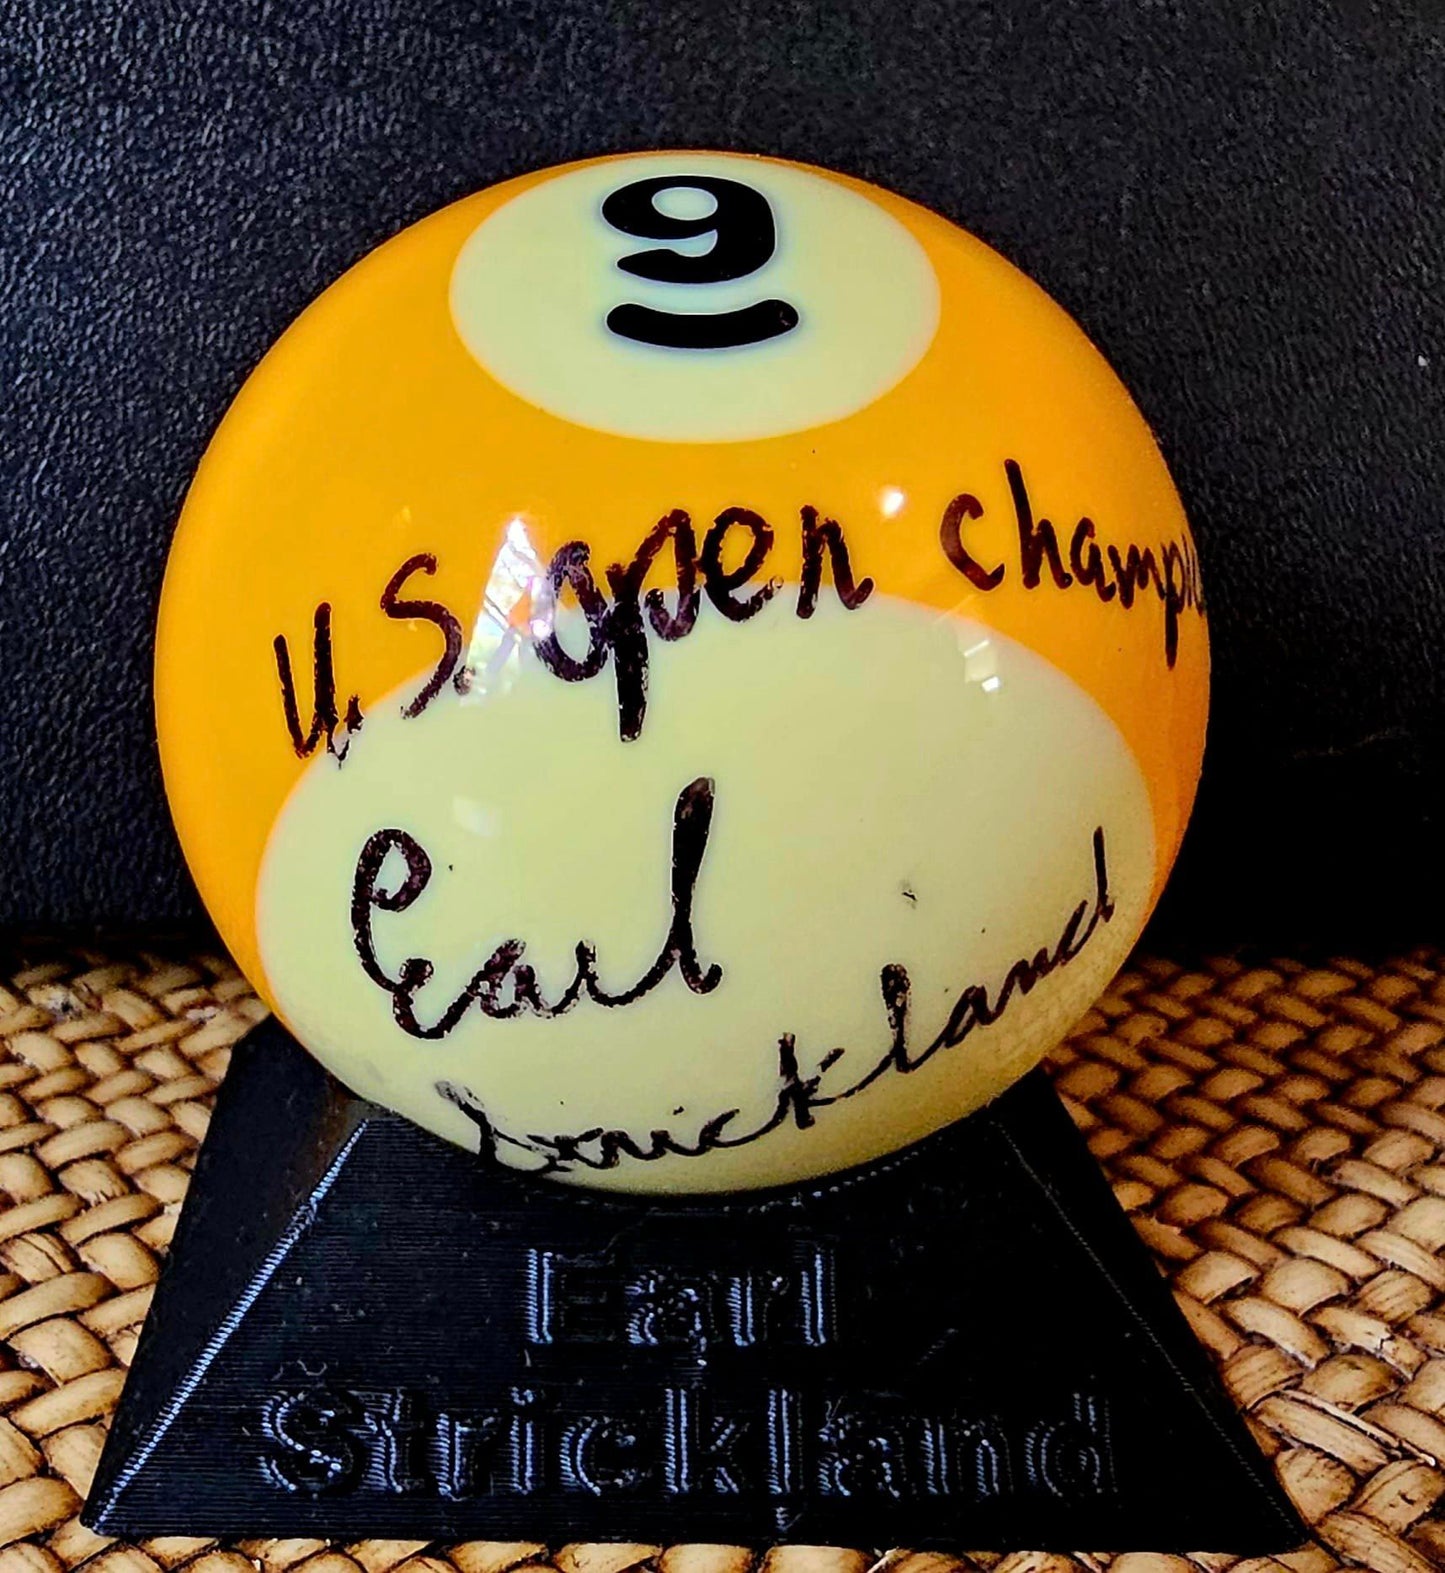 US OPEN Champion Autographed 9-Ball